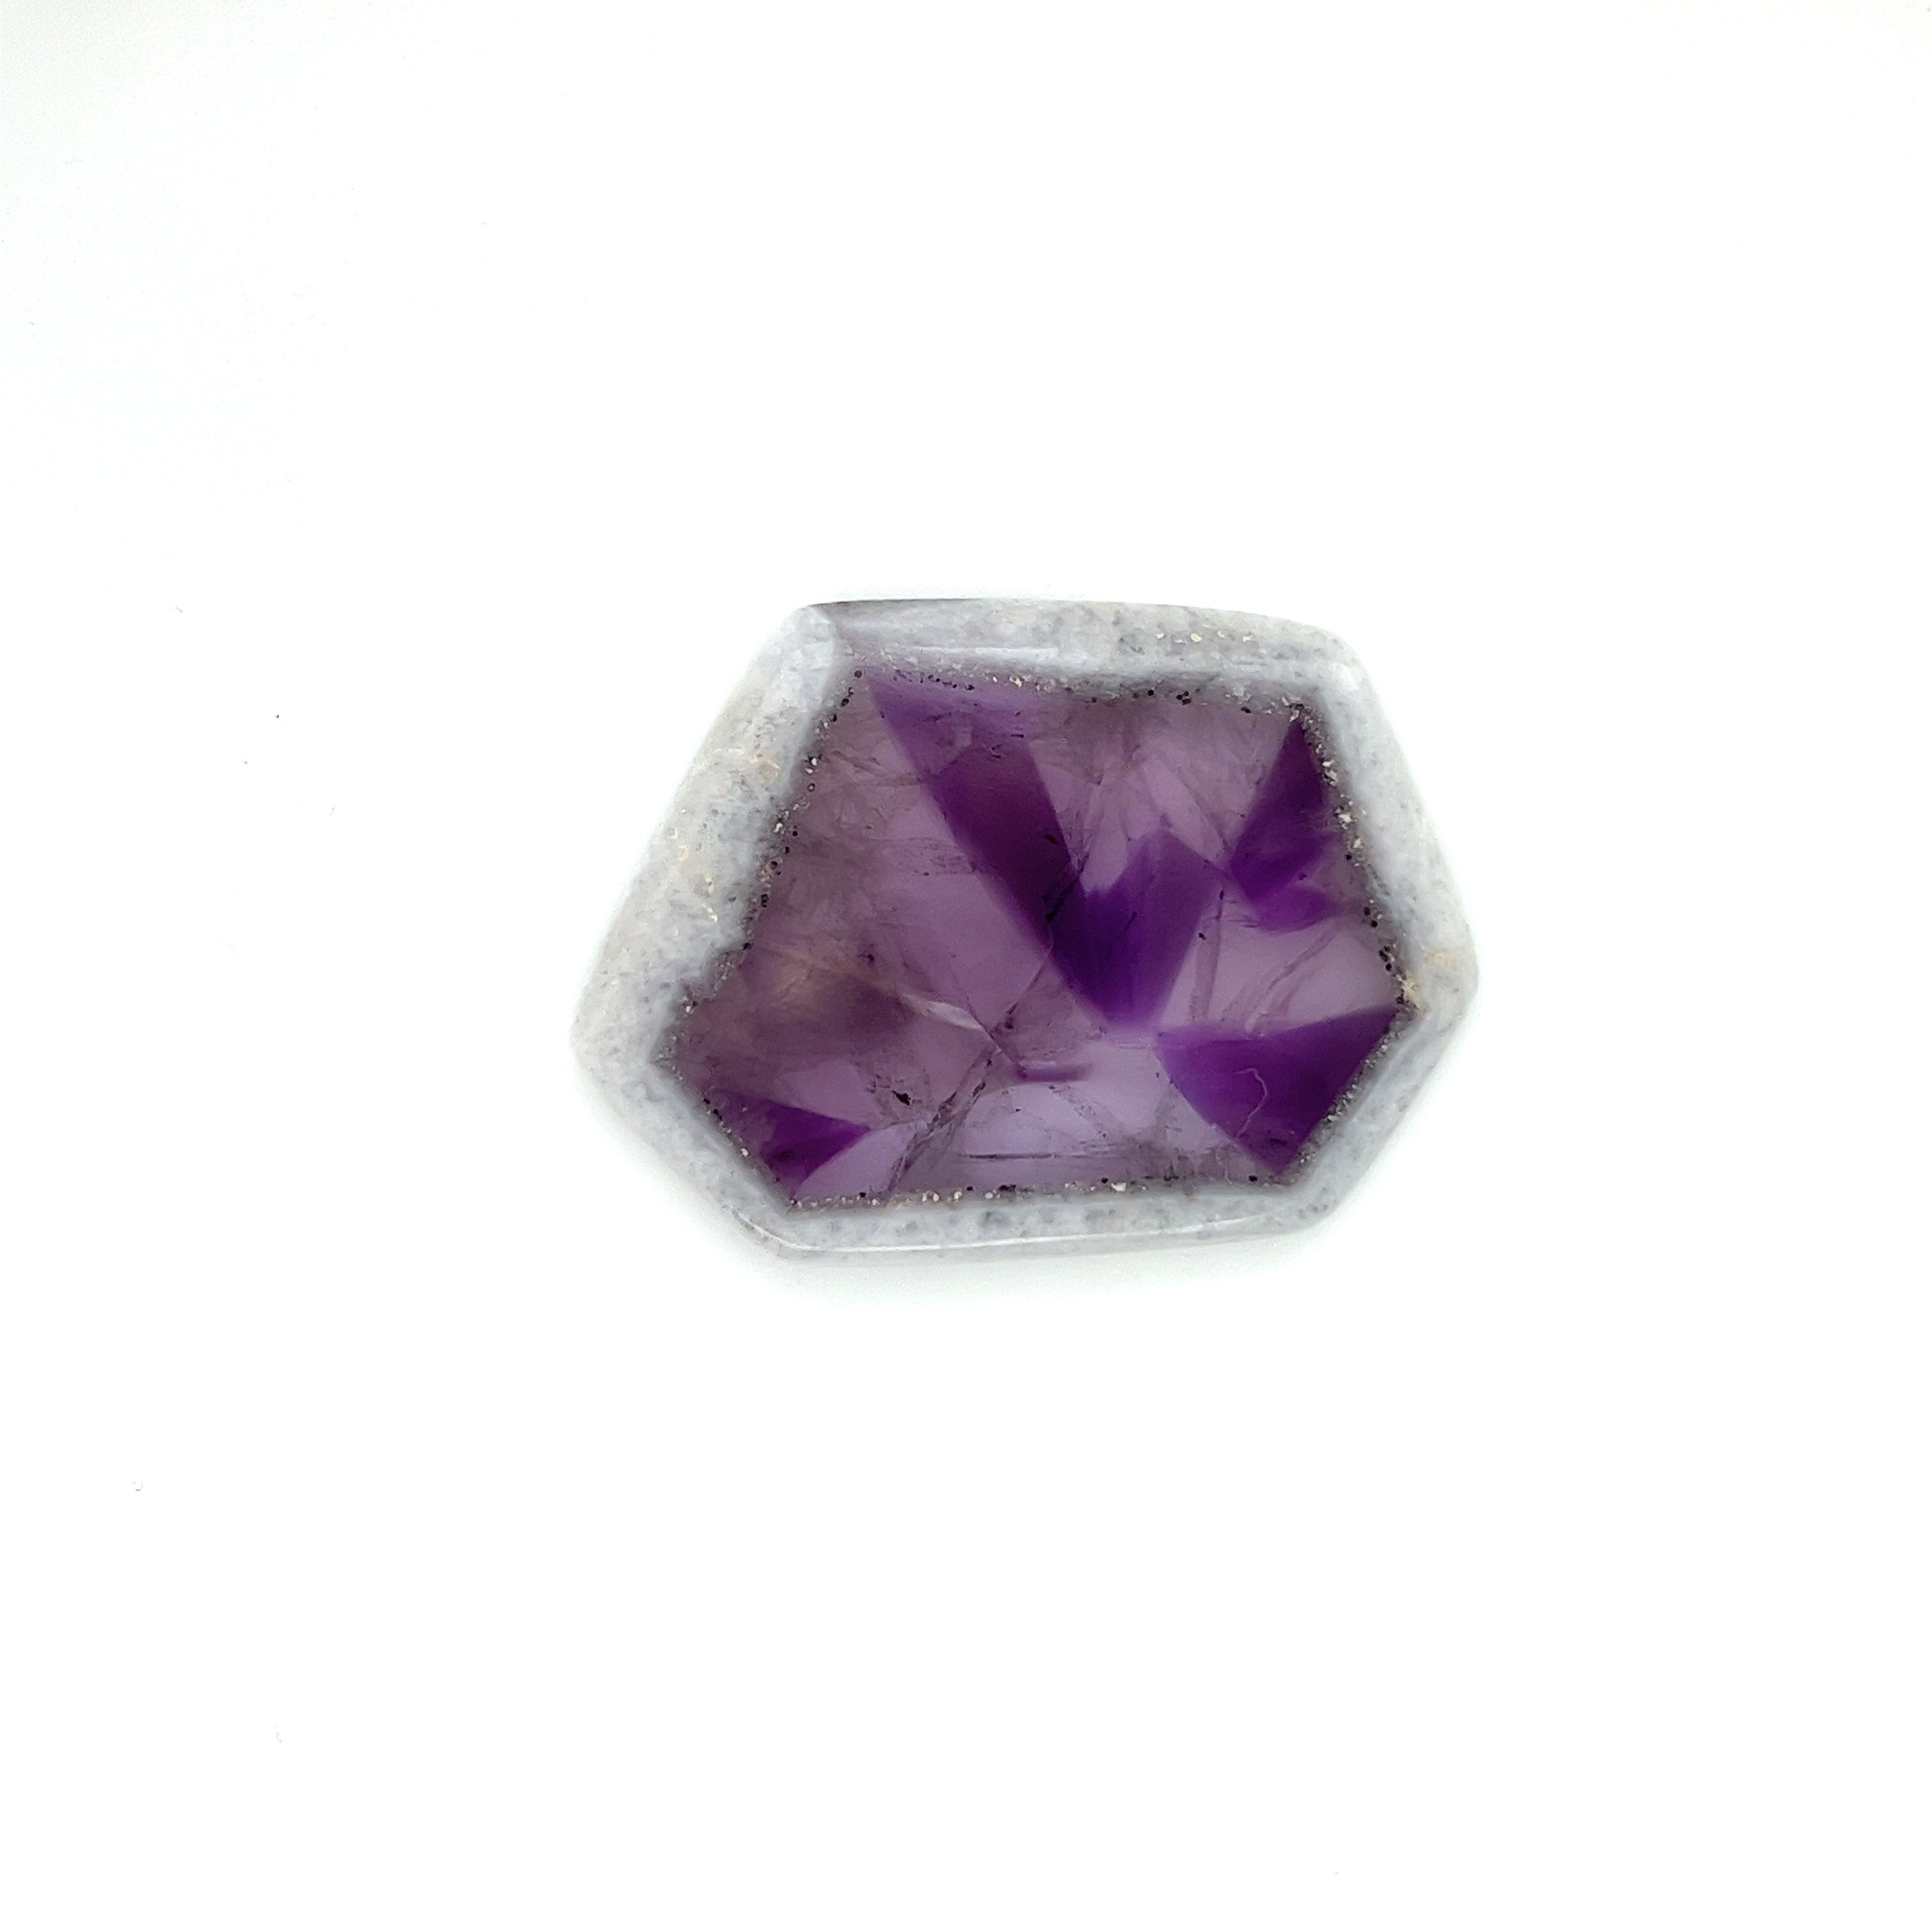 Trapiche Amethyst; Natural Untreated India Amethyst Slice, 15 grams - Mark Oliver Gems